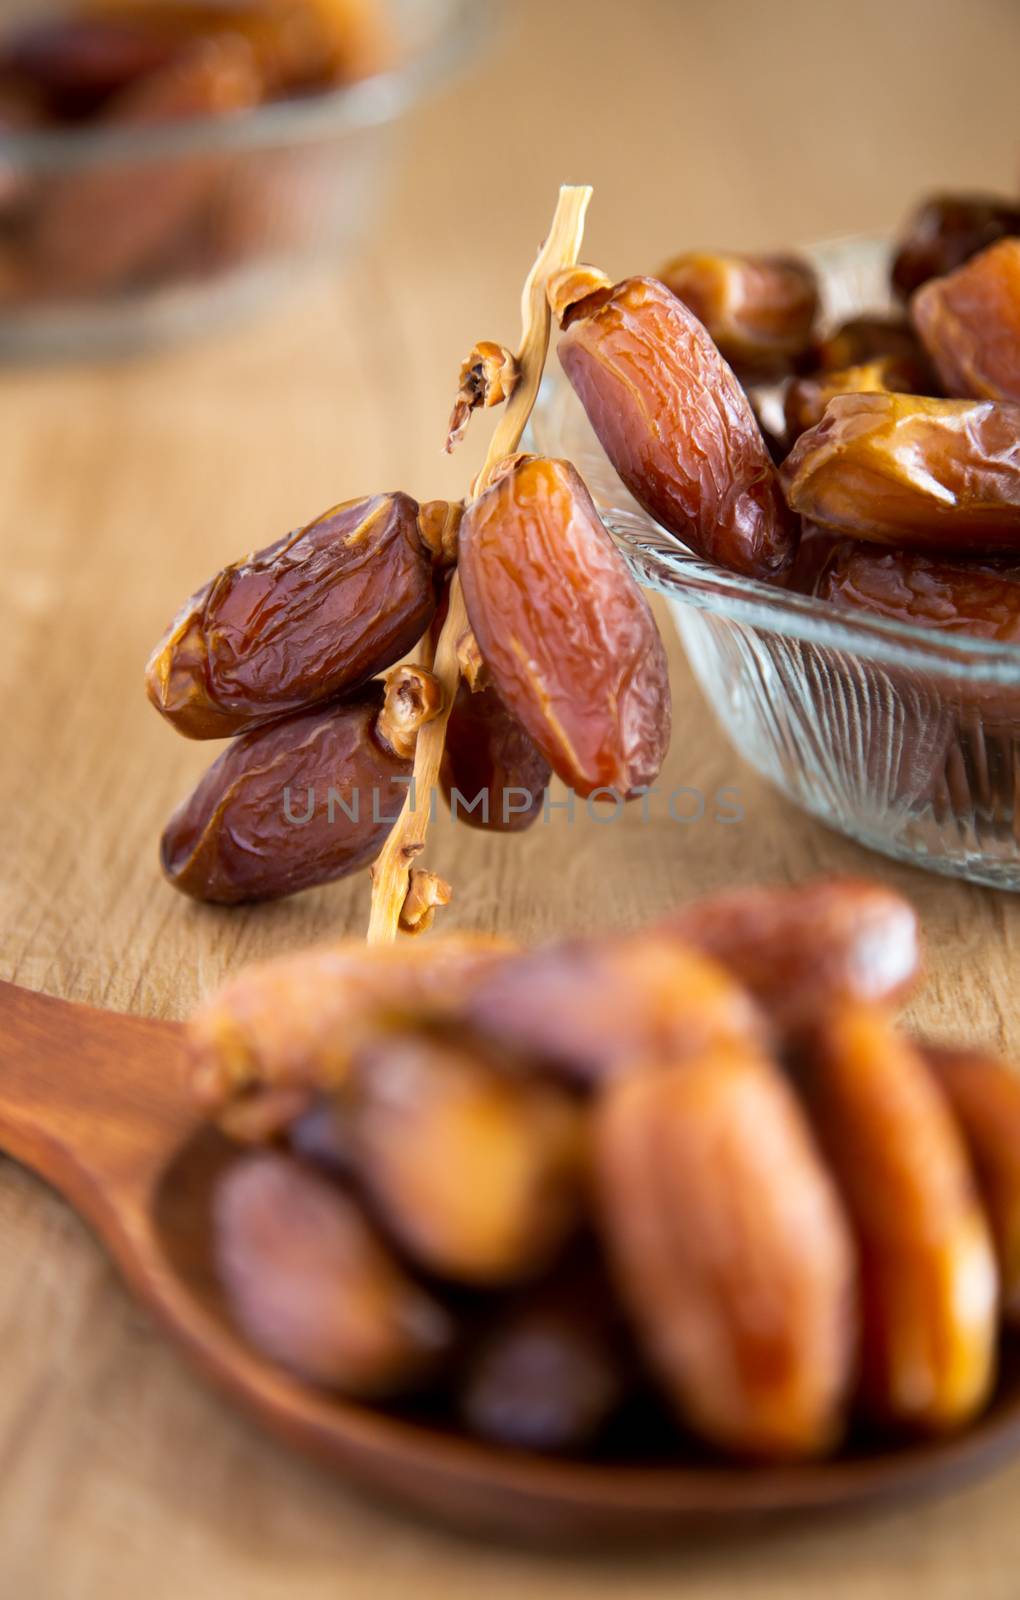 Kurma or dates on wooden background by tehcheesiong